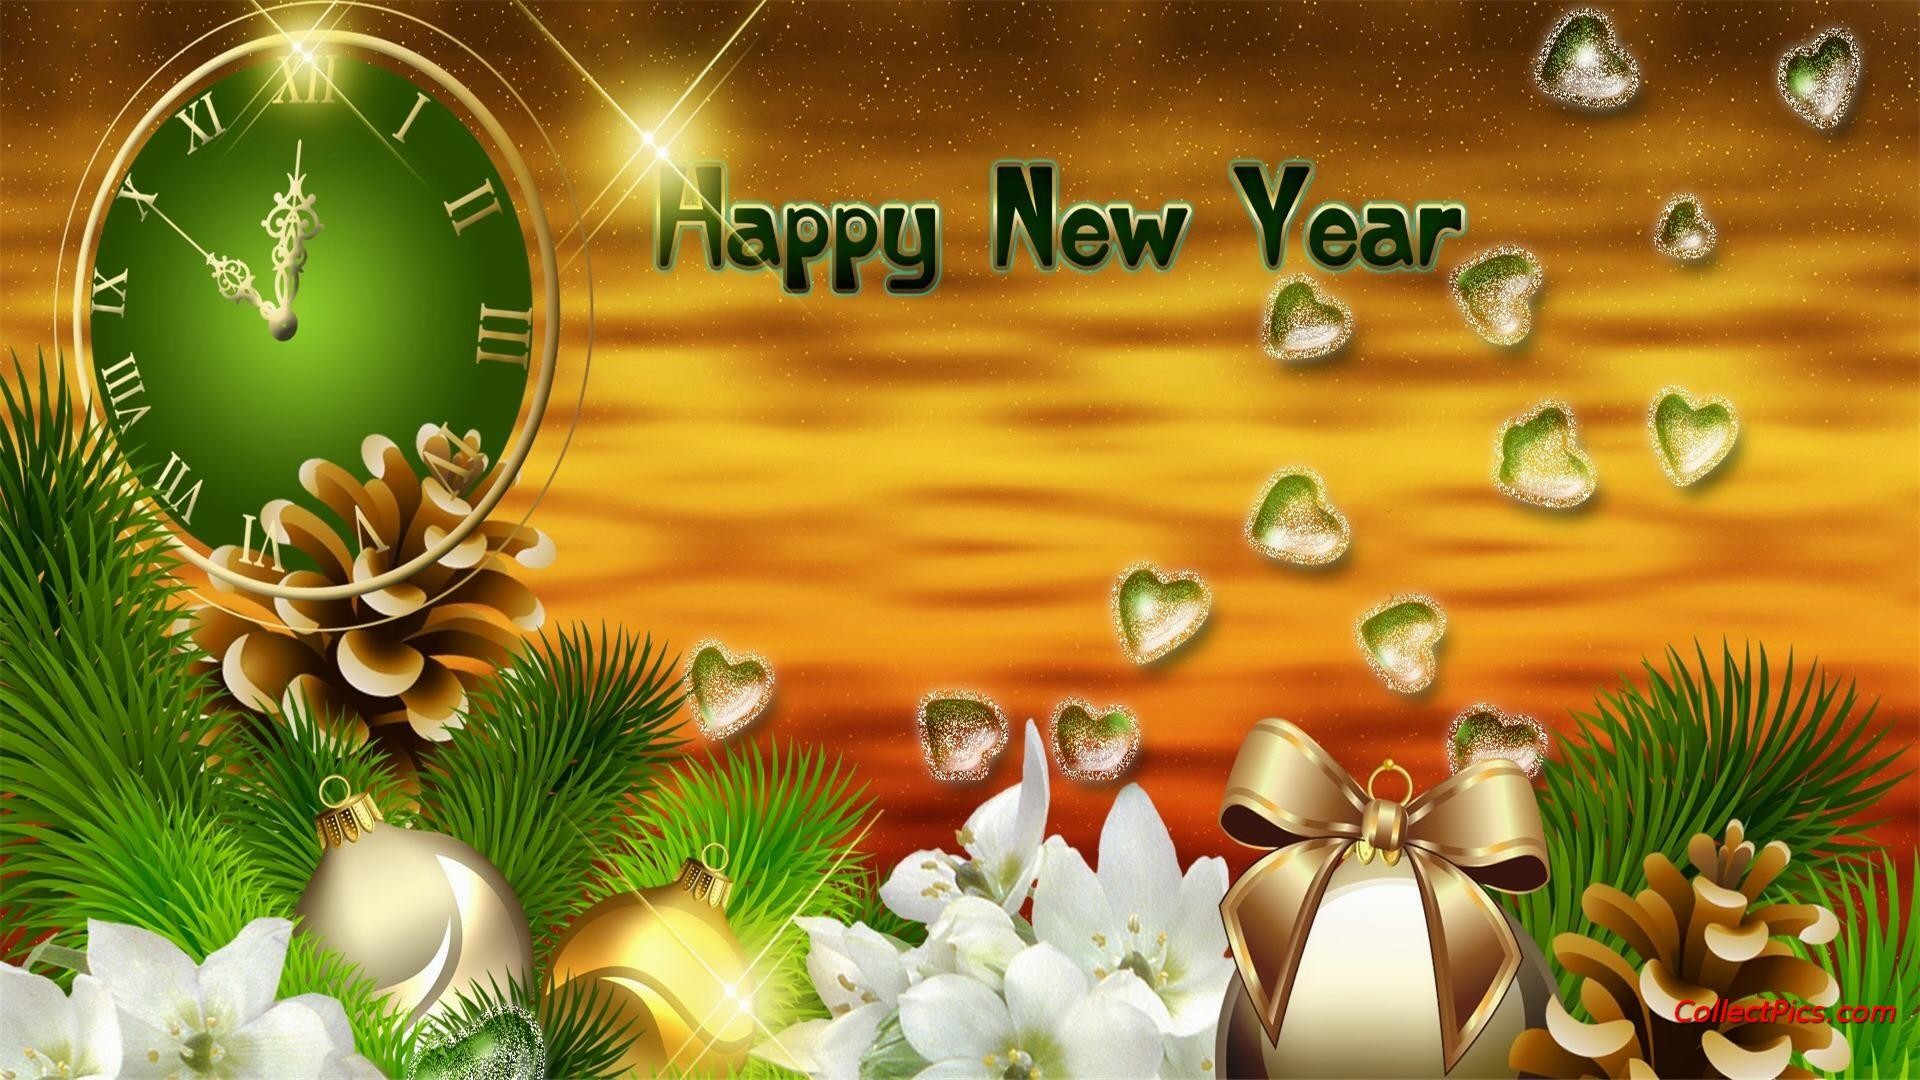 1920x1080 new year wallpaper 2017 free download